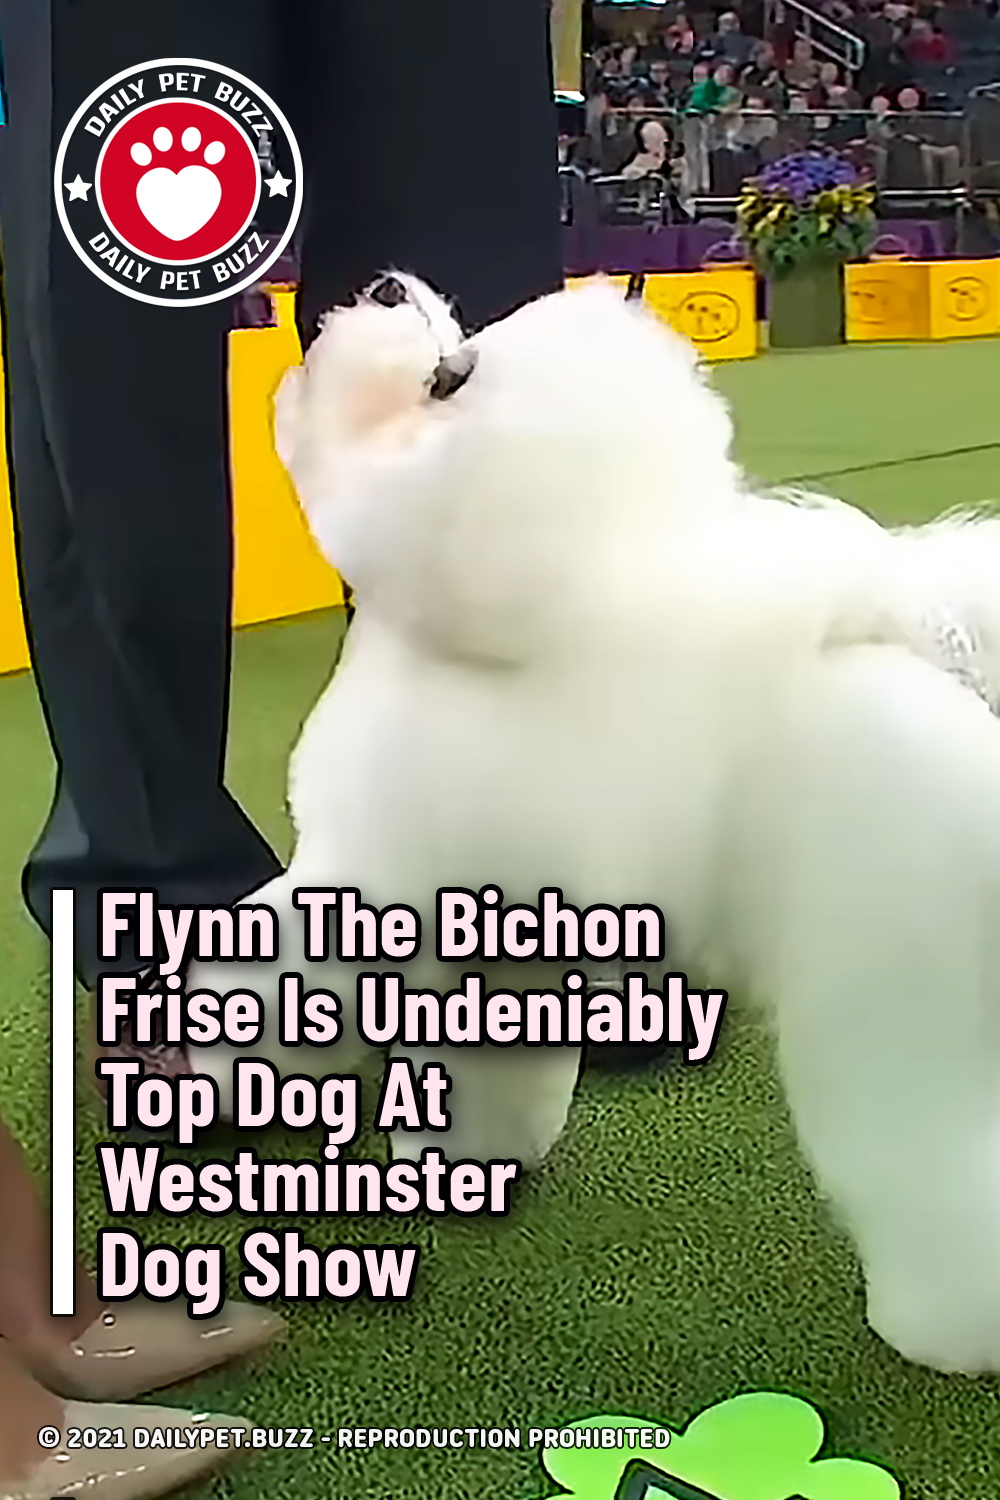 Flynn The Bichon Frise Is Undeniably Top Dog At Westminster Dog Show